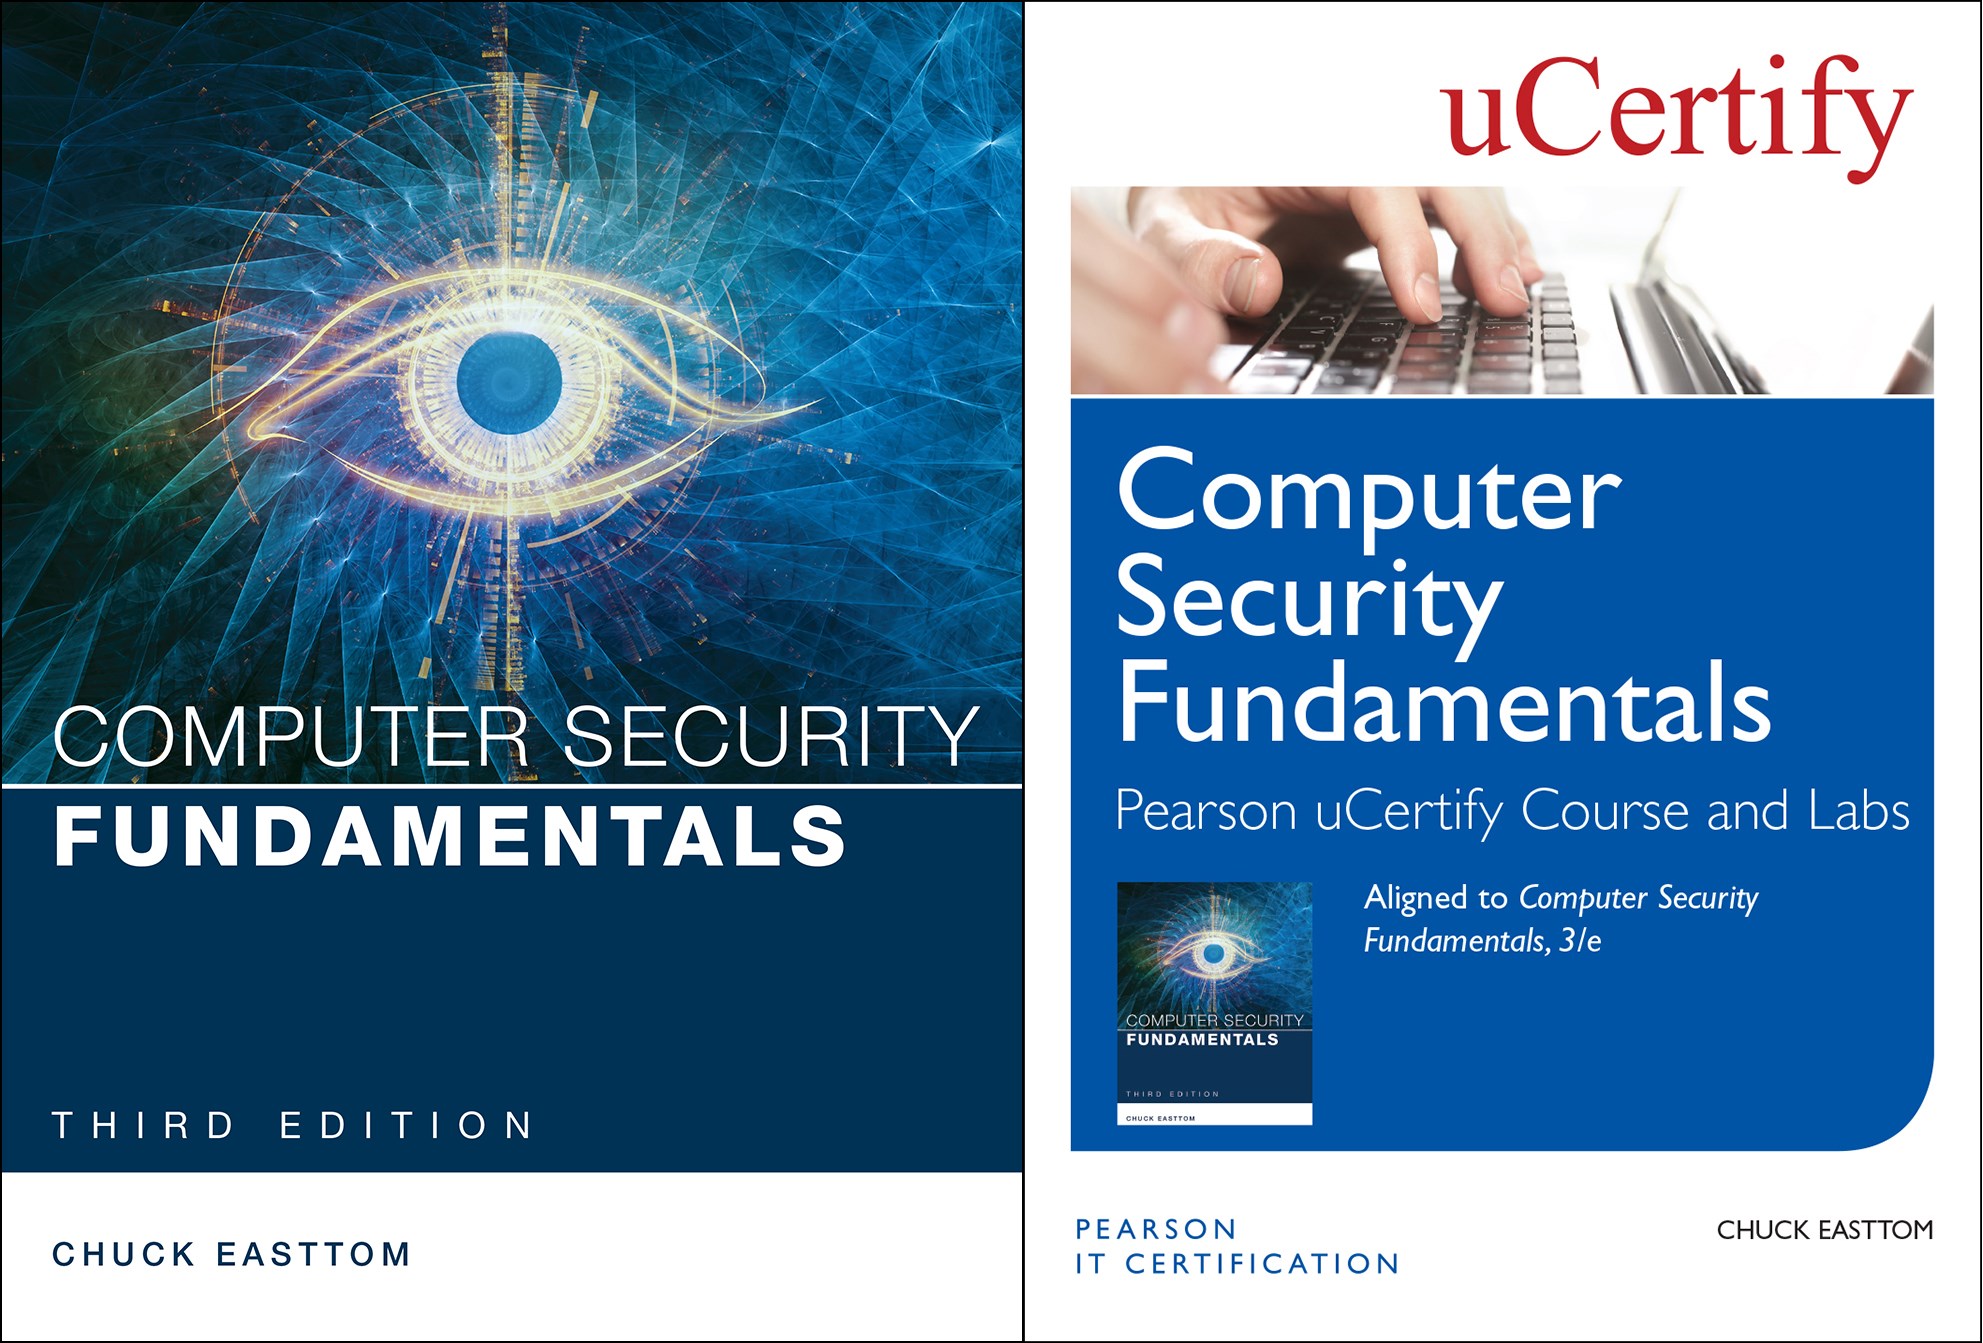 Computer Security Fundamentals Pearson uCertify Course and Labs and Textbook Bundle